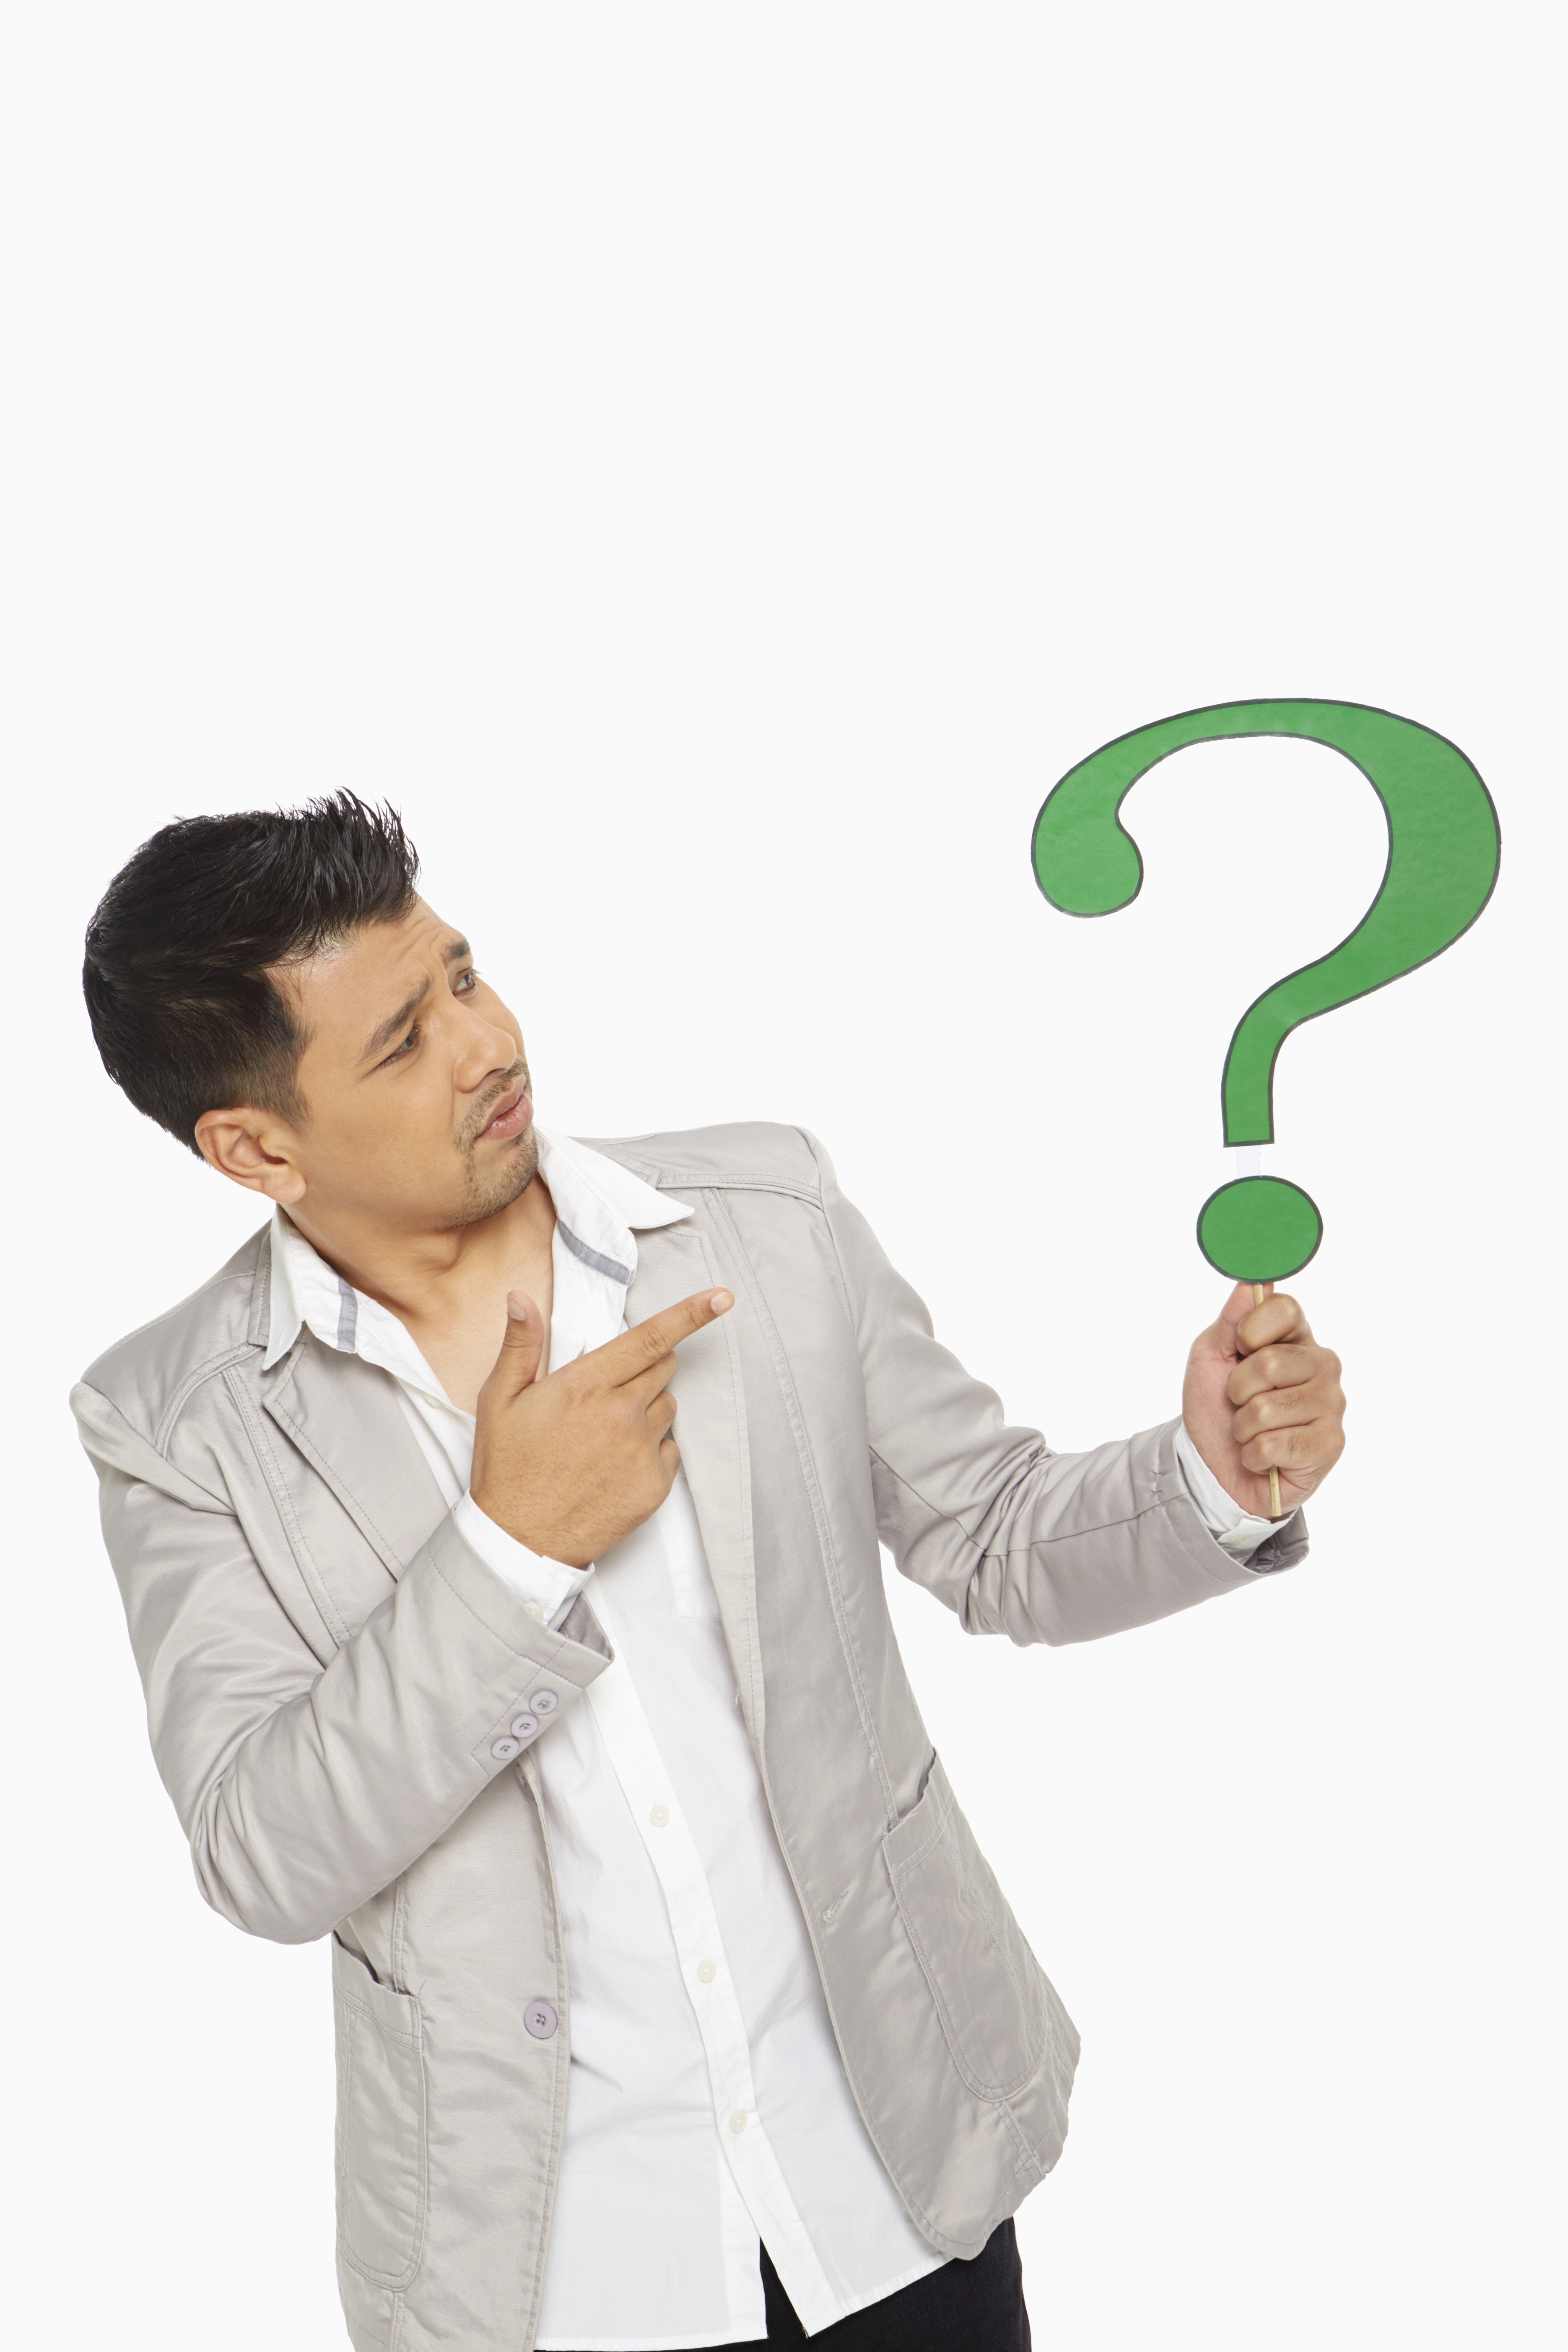 Man holding up a question mark symbol | Perfect Path Blog - Your